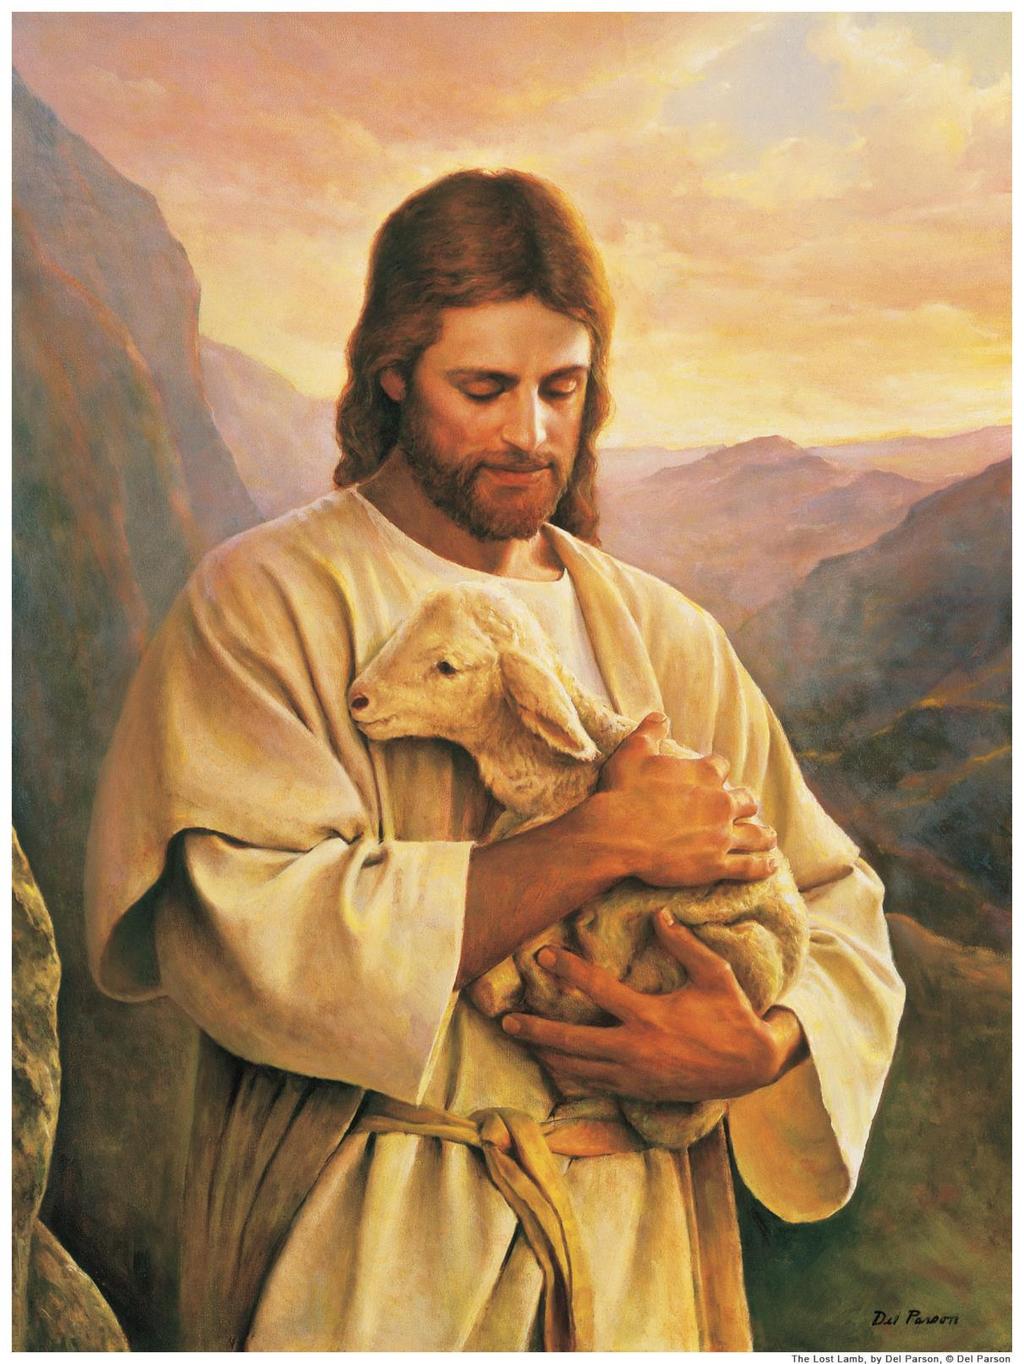 Jesus Christ created all the animals and all